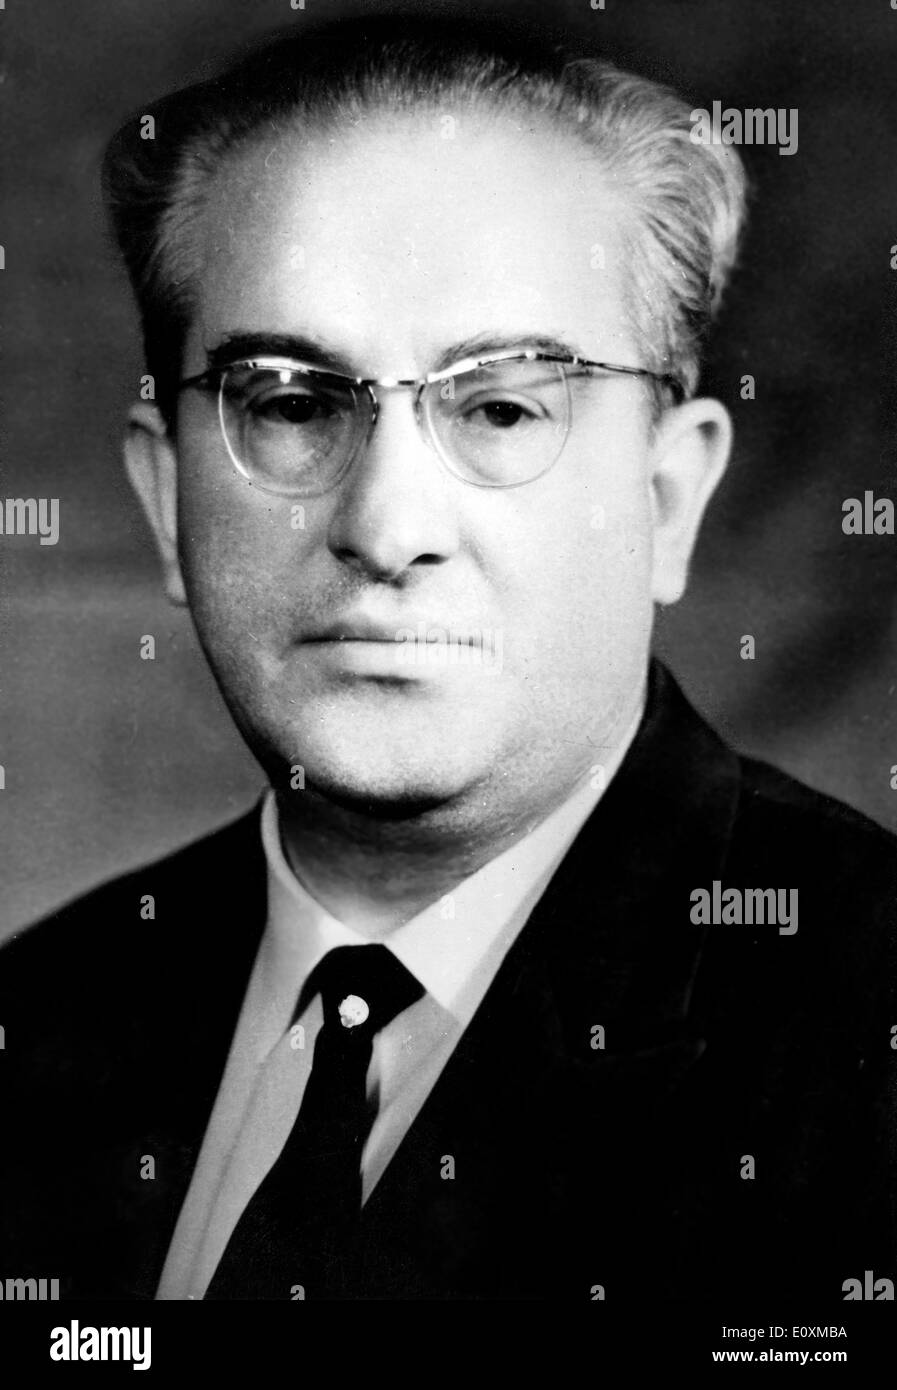 May 18, 1967; Moscow, Russia; Reports from Moscow, annunce important changes in the Soviet Secret Police. Vladimir Seichastny, the former Chief, has been replaced by YURI ANDROPOV. The changes, it is thought, have something to do with the escape from Russia of Stalin's daughter, Svetlana Alleluyeva. The picture shows a recent portrait of Yuri, the new Chief of the Soviet Secret Police. Stock Photo